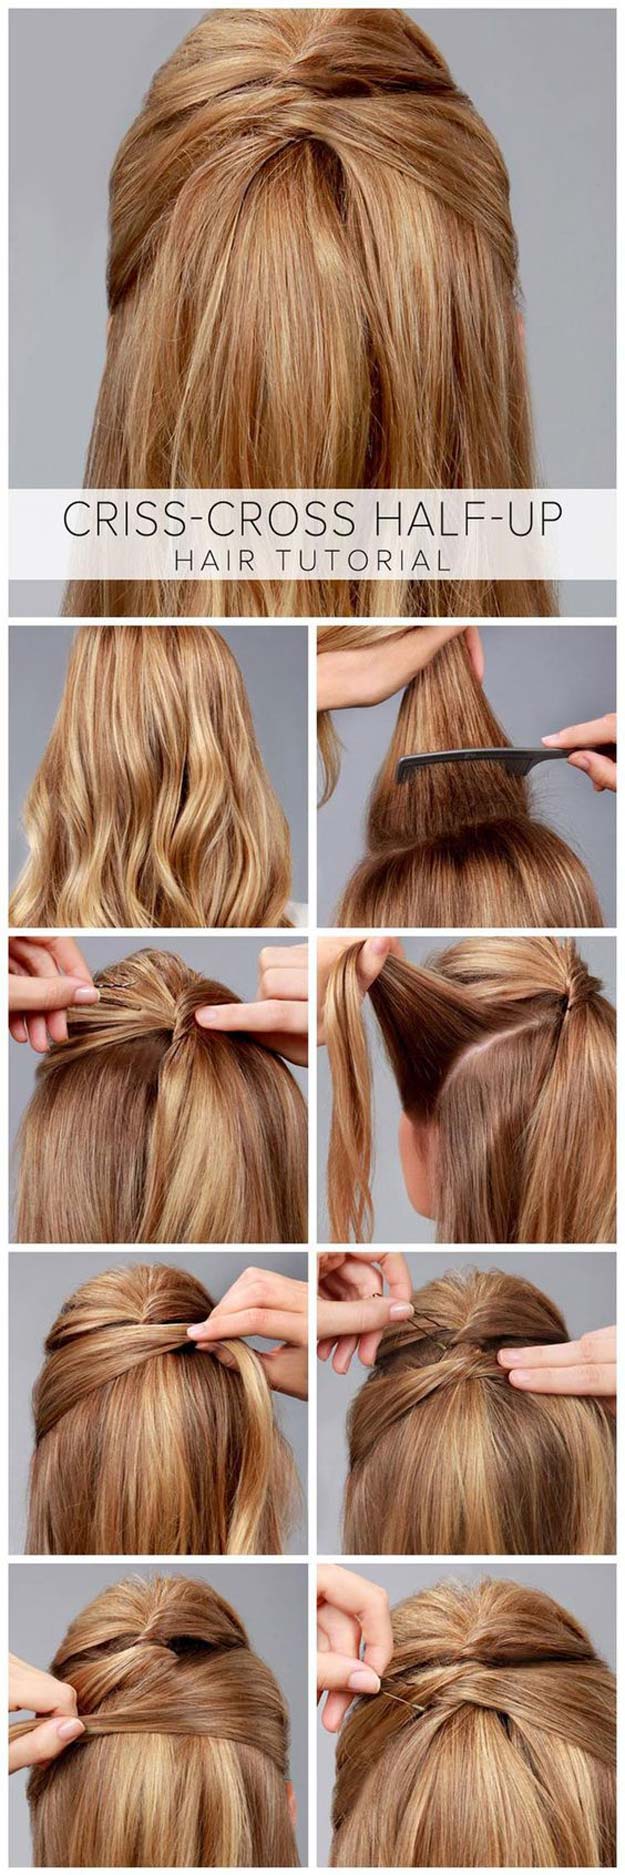 Best Hairstyles for Long Hair - Summer Styles for Long Hair - Step by Step Tutorials for Easy Curls, Updo, Half Up, Braids and Lazy Girl Looks. Prom Ideas, Special Occasion Hair and Braiding Instructions for Teens, Teenagers and Adults, Women and Girls 